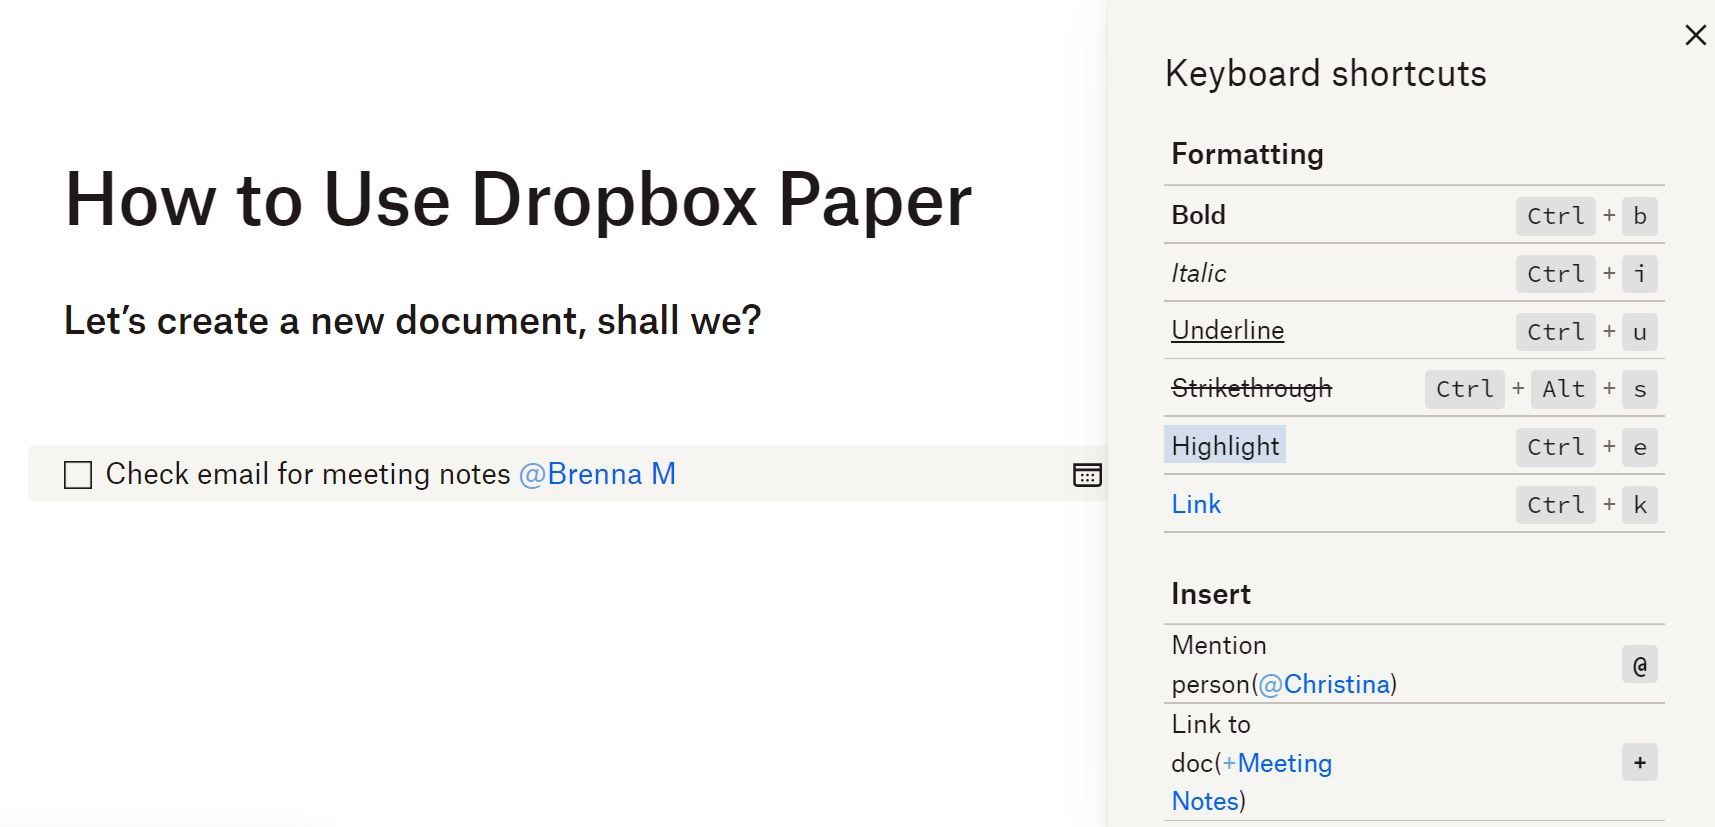 Image shows the keyboard shortcuts inside Dropbox Paper